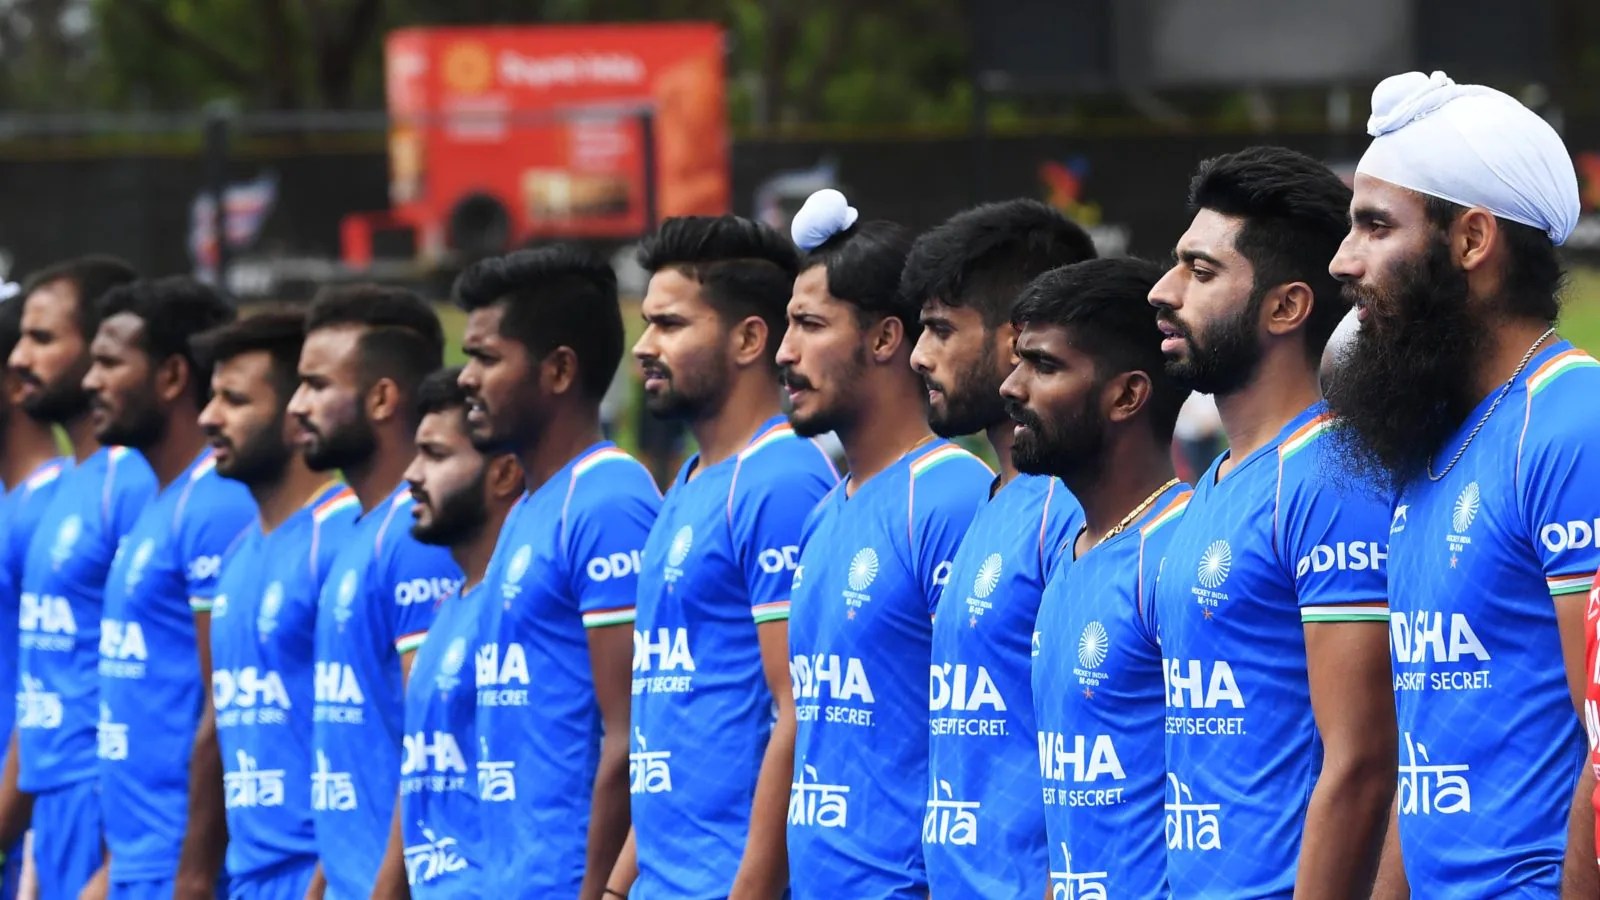 Sports in 2023: From PV Sindhu's Asian Games GOLD to Hamilton's 8th World title, Team India favorites for 2023 World Cup, 8 things to look forward to in 2023 - Check out